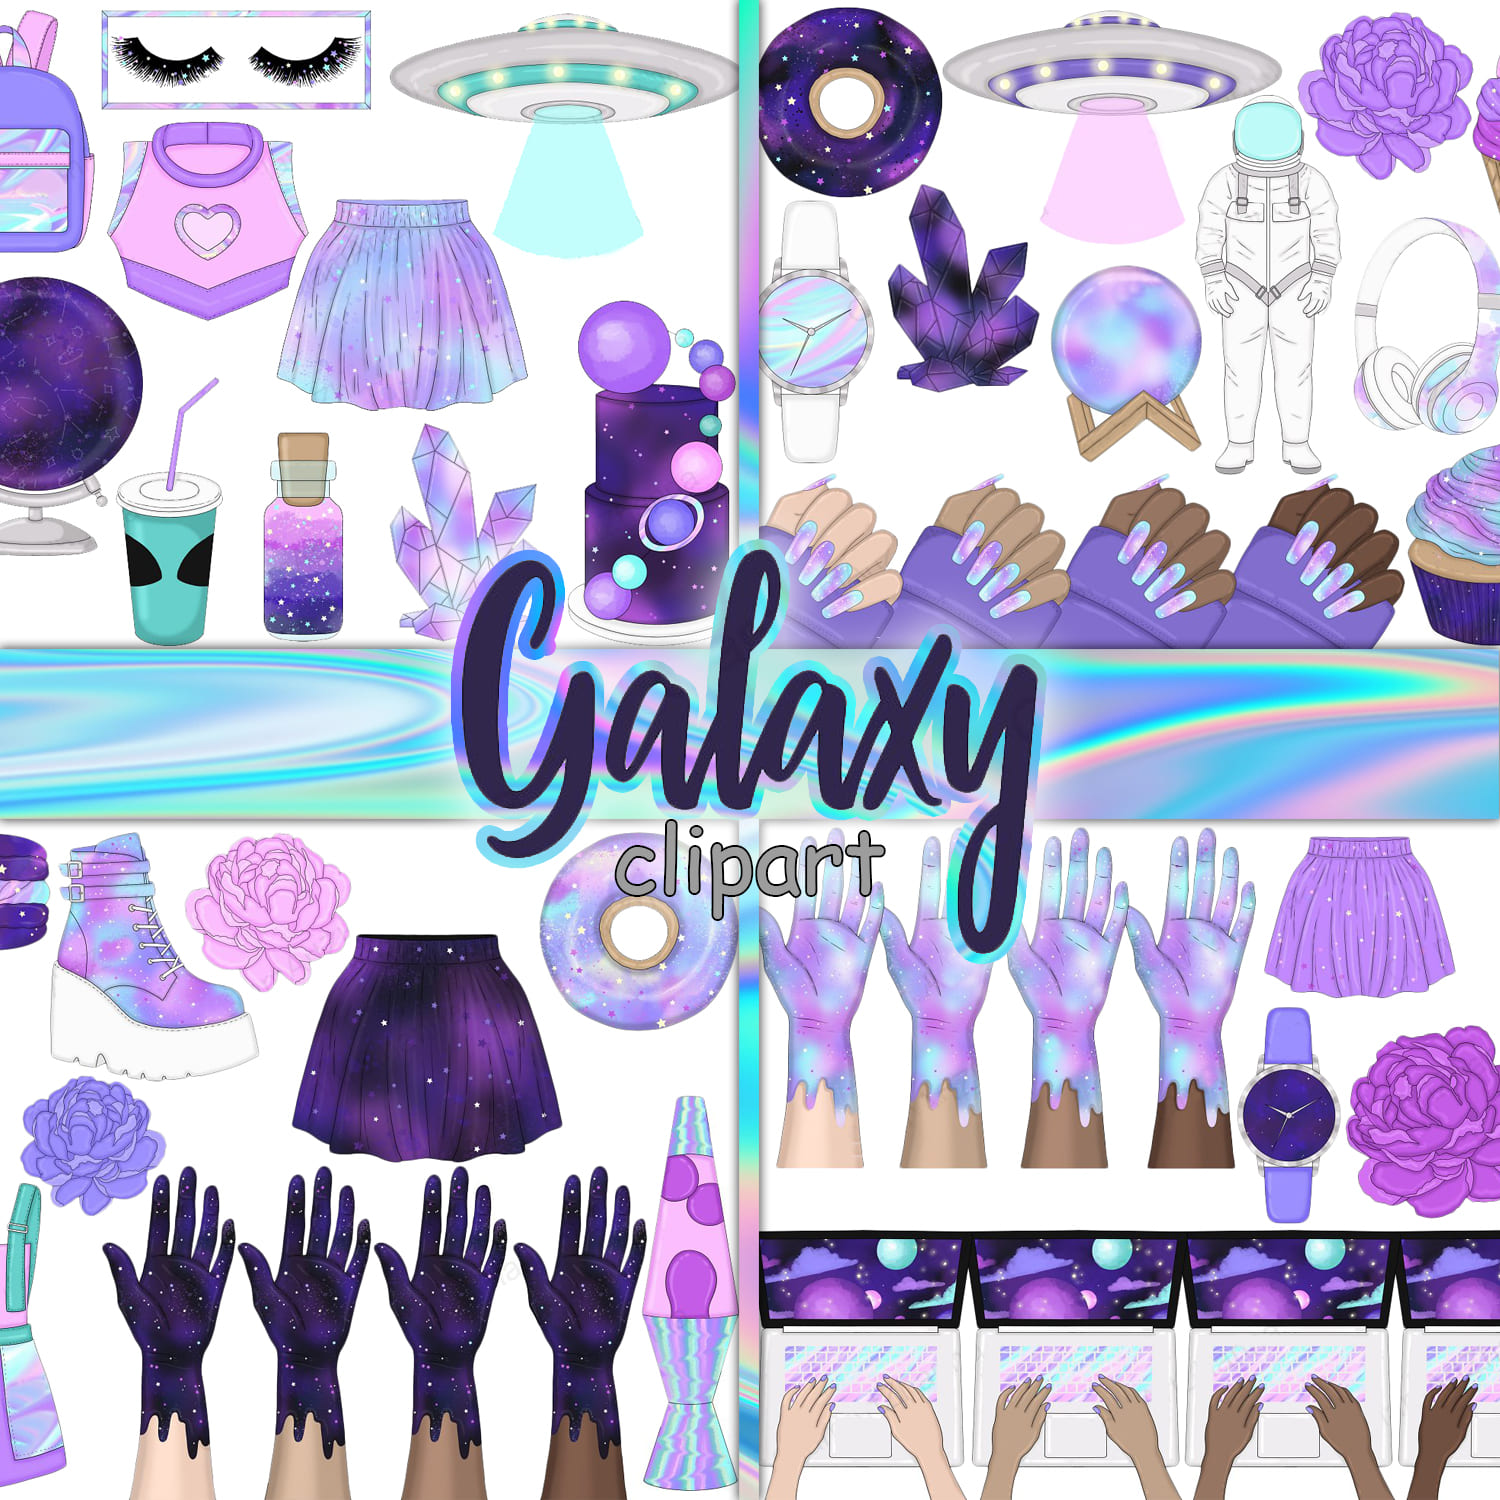 Galaxy Clipart cover image.